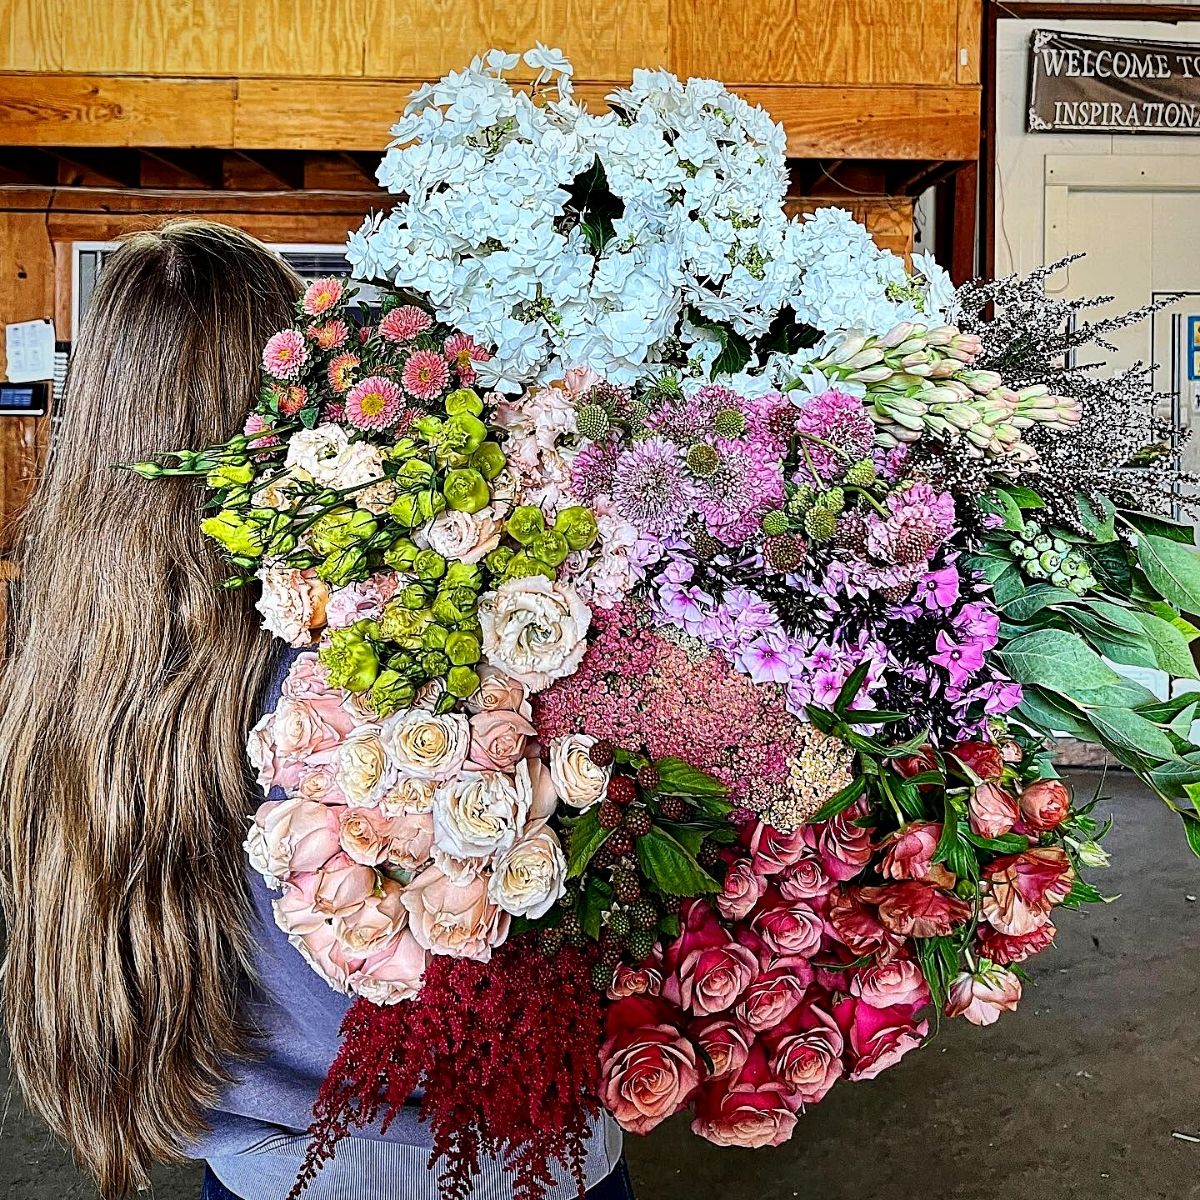 Florabundance: A Leading Wholesale Floral Solutions Provider in North America